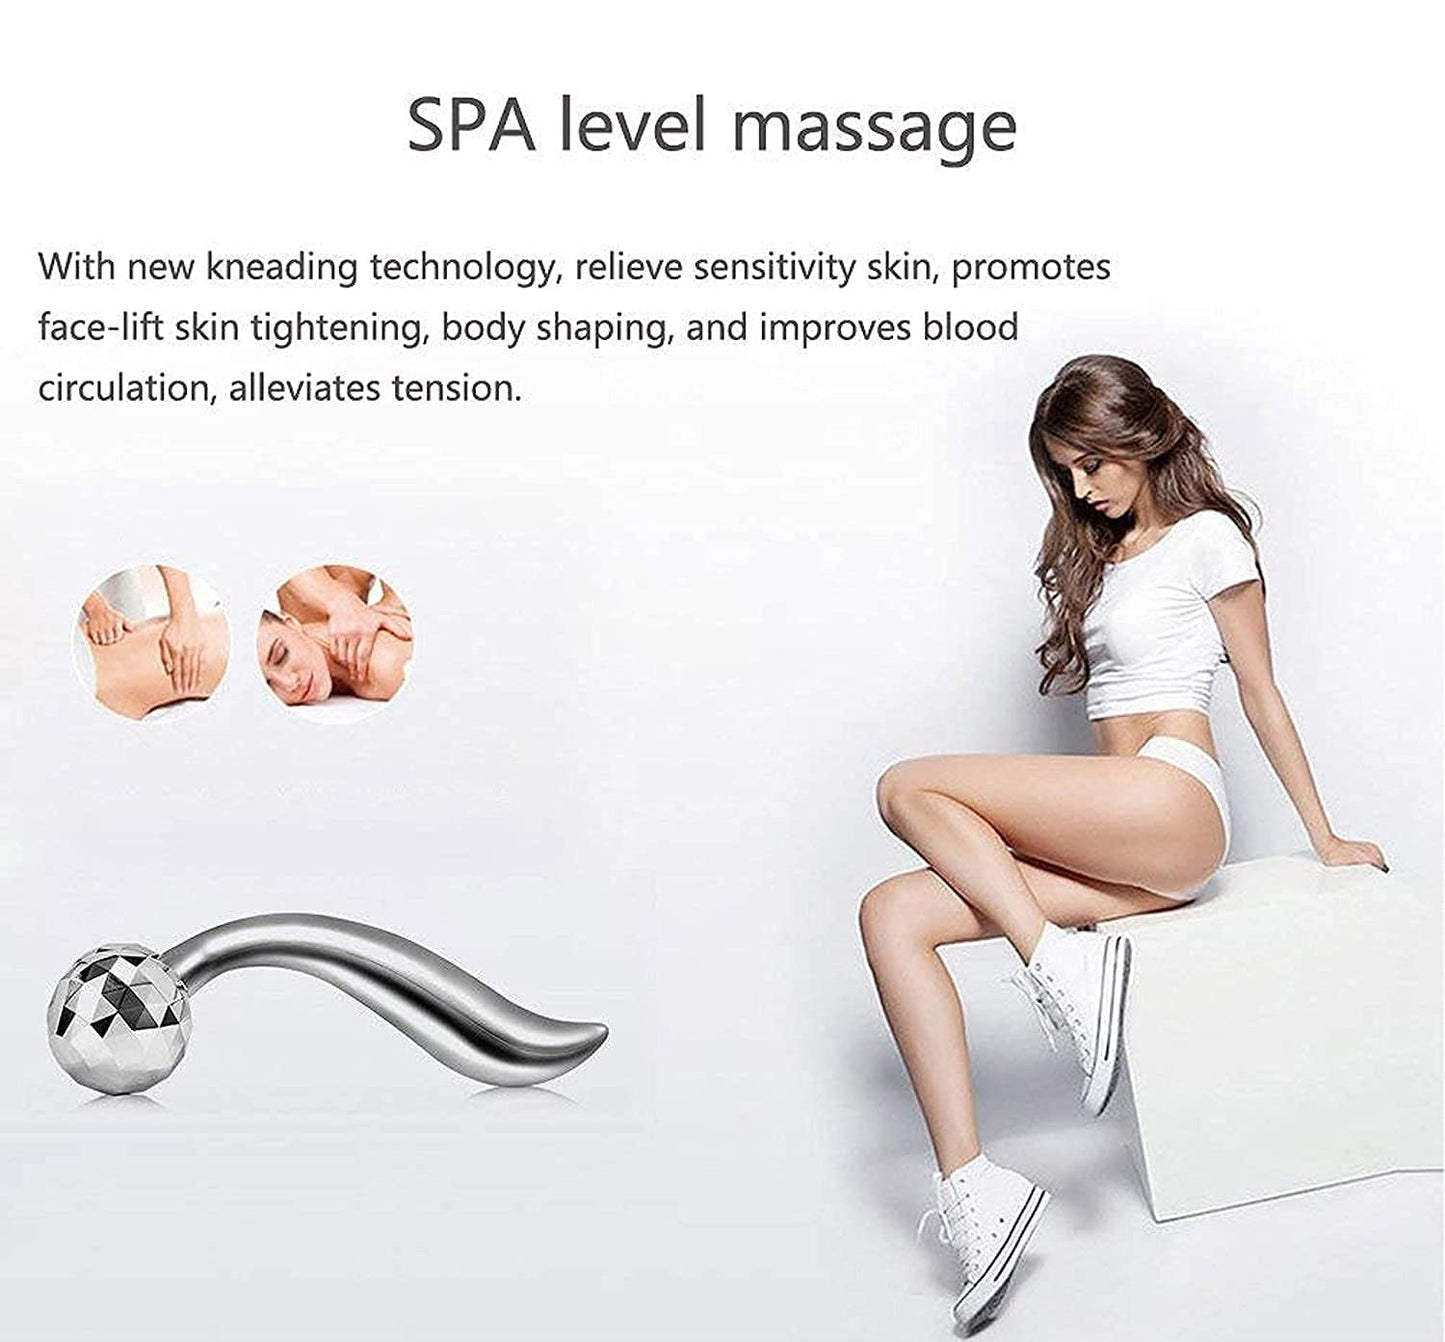 3D Massager - Manual 3D Massager Roller 360 Rotate Face Full Body Shape for Skin Lifting Wrinkle Remover Facial Massage Relaxation Tool,(Silver Color, 1Pcs)